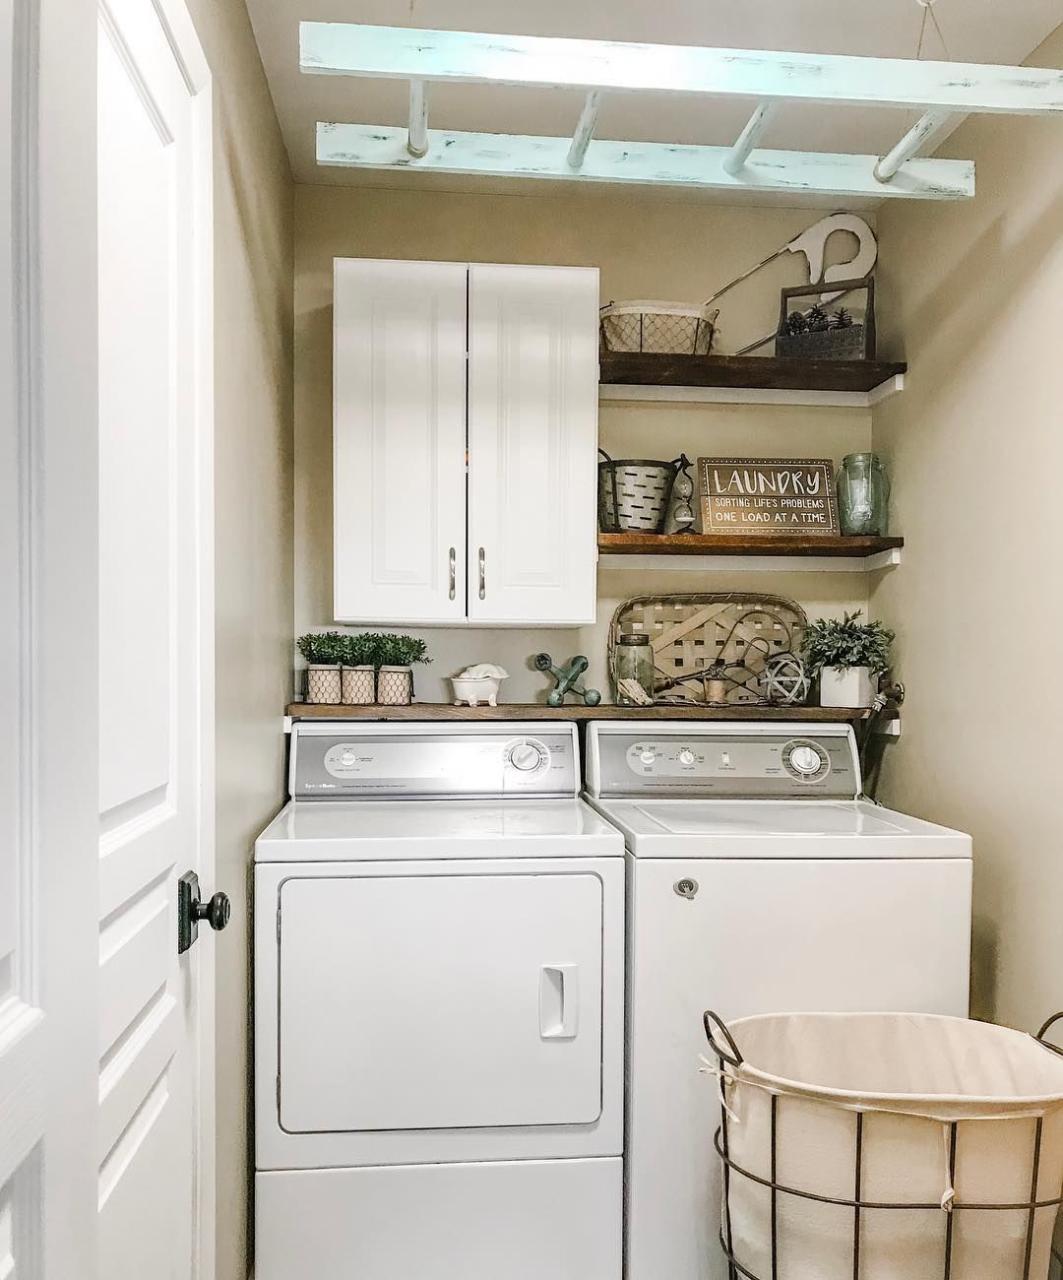 Shelves Small Laundry Room Ideas With Top Loading Washer Todd Leroy